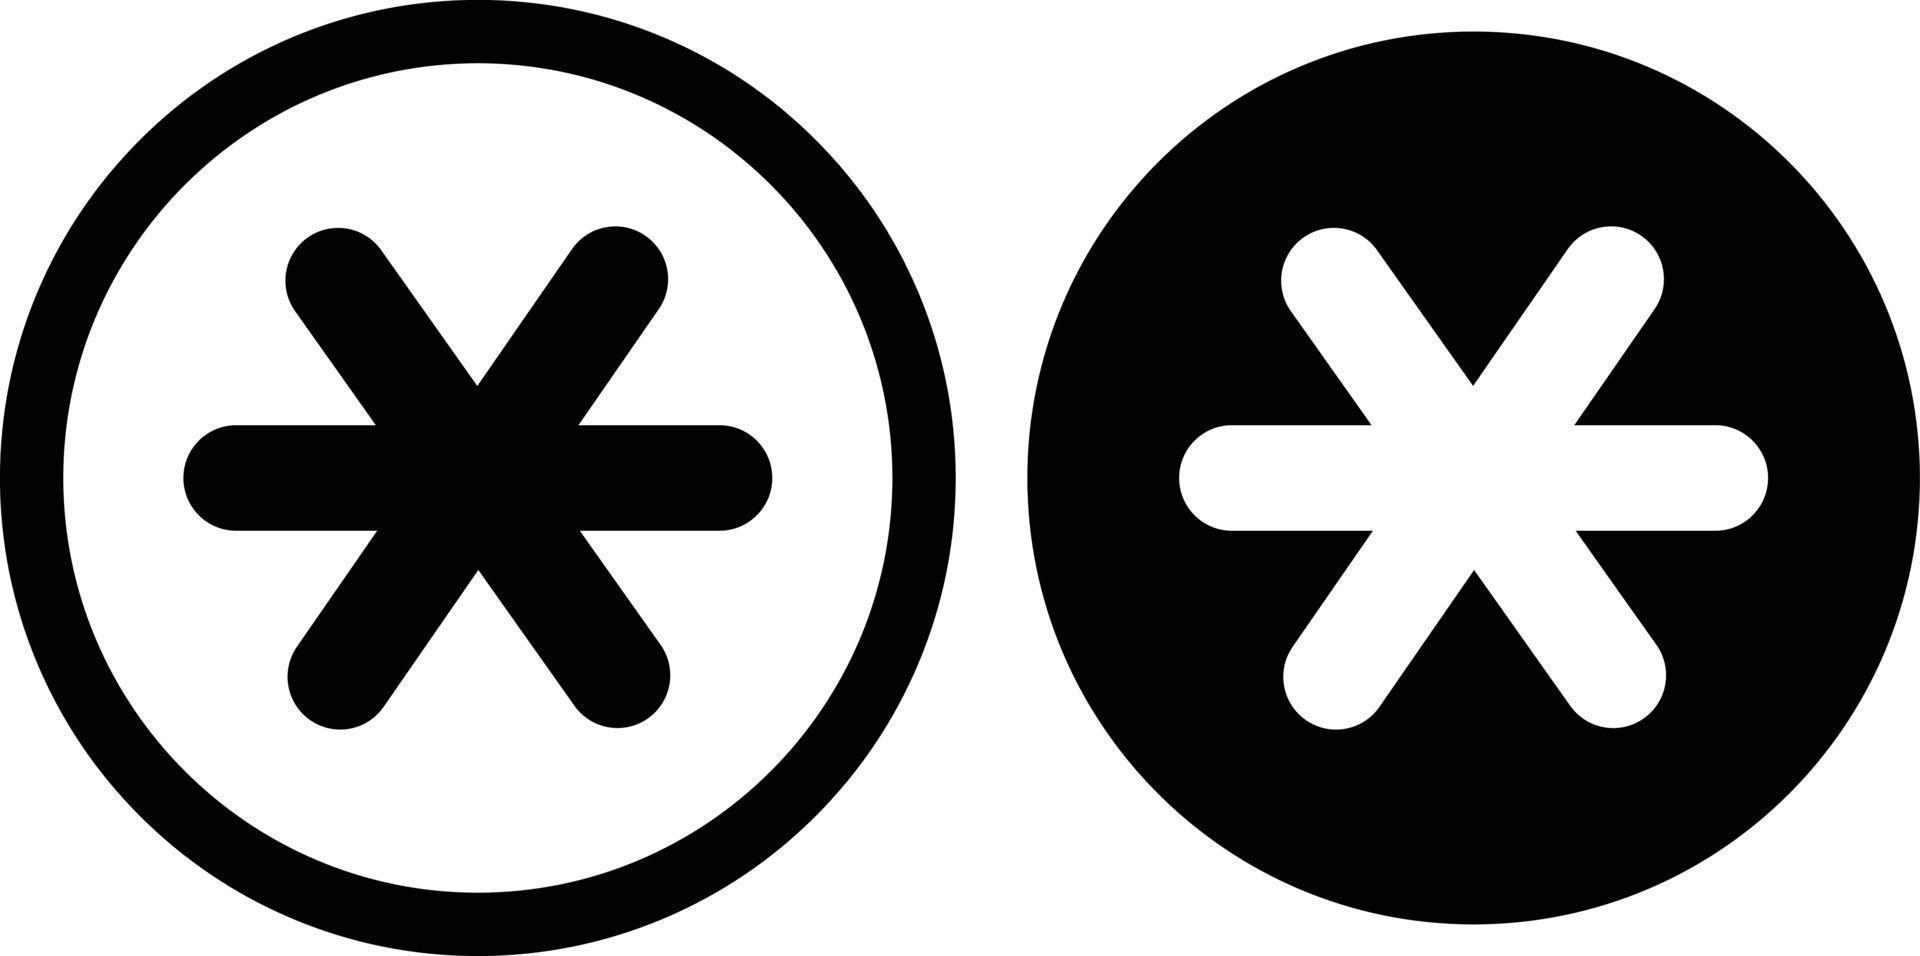 asterisk footnote in circle. asterisk icon on white background. star note sign. flat style. vector